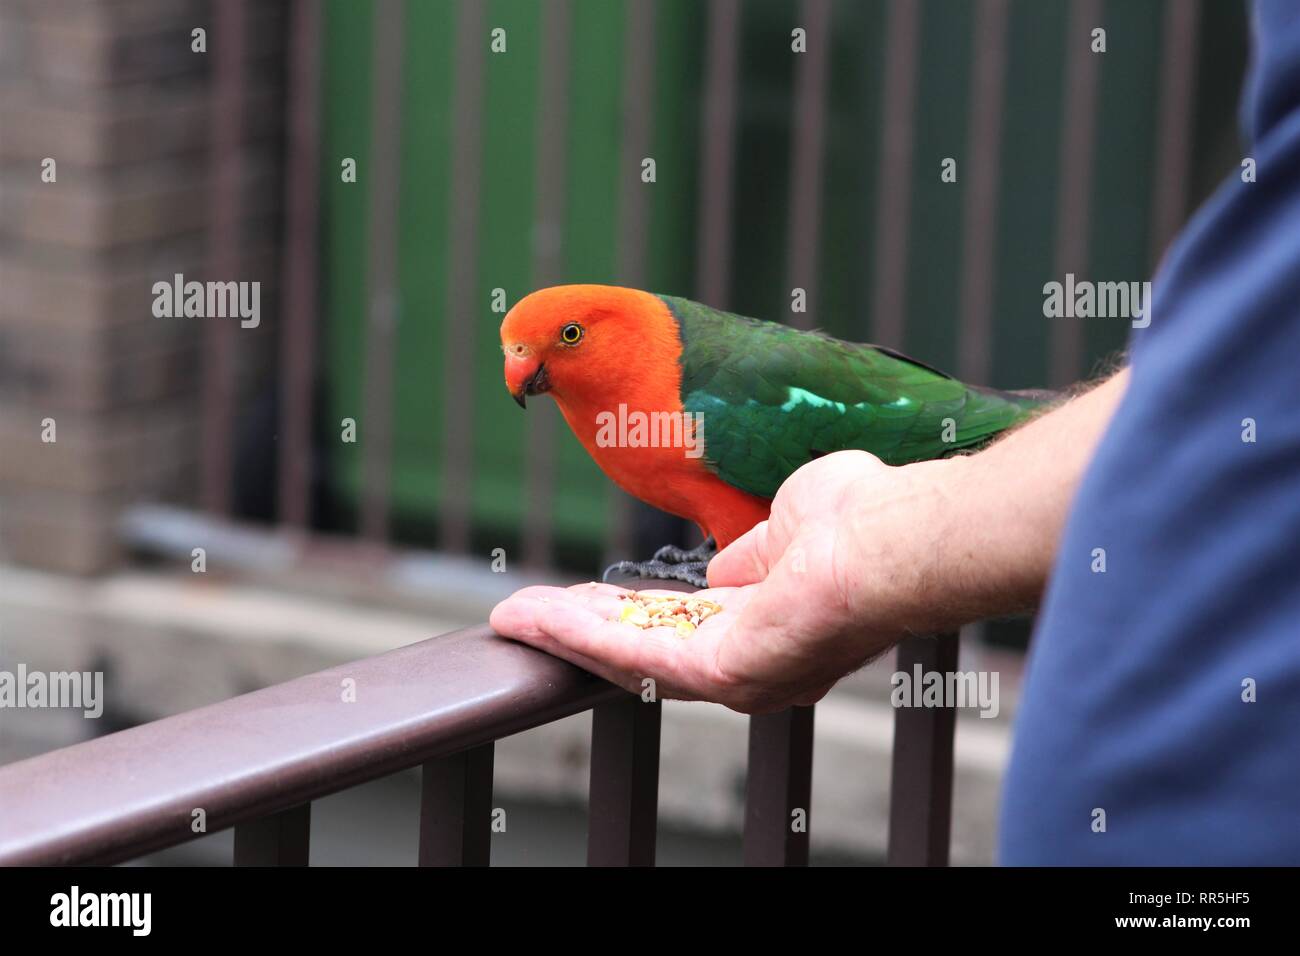 Red and green parrot being fed from a hand Stock Photo